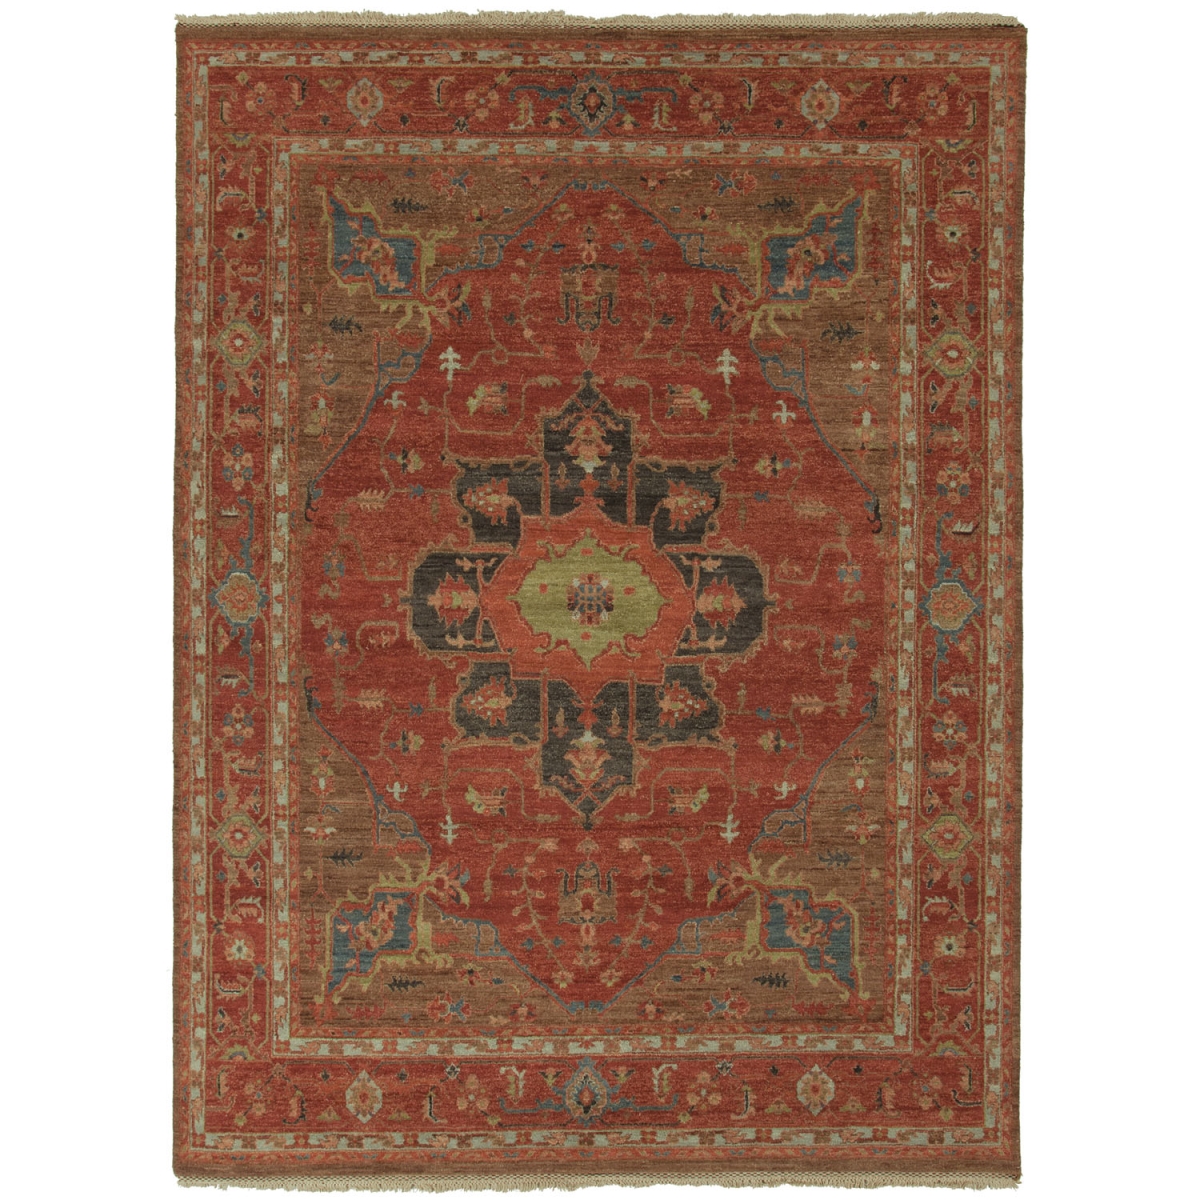 Rug104272 2 X 3 Ft. Uptown Artemis York Hand-knotted Medallion Red & Brown Area Rug